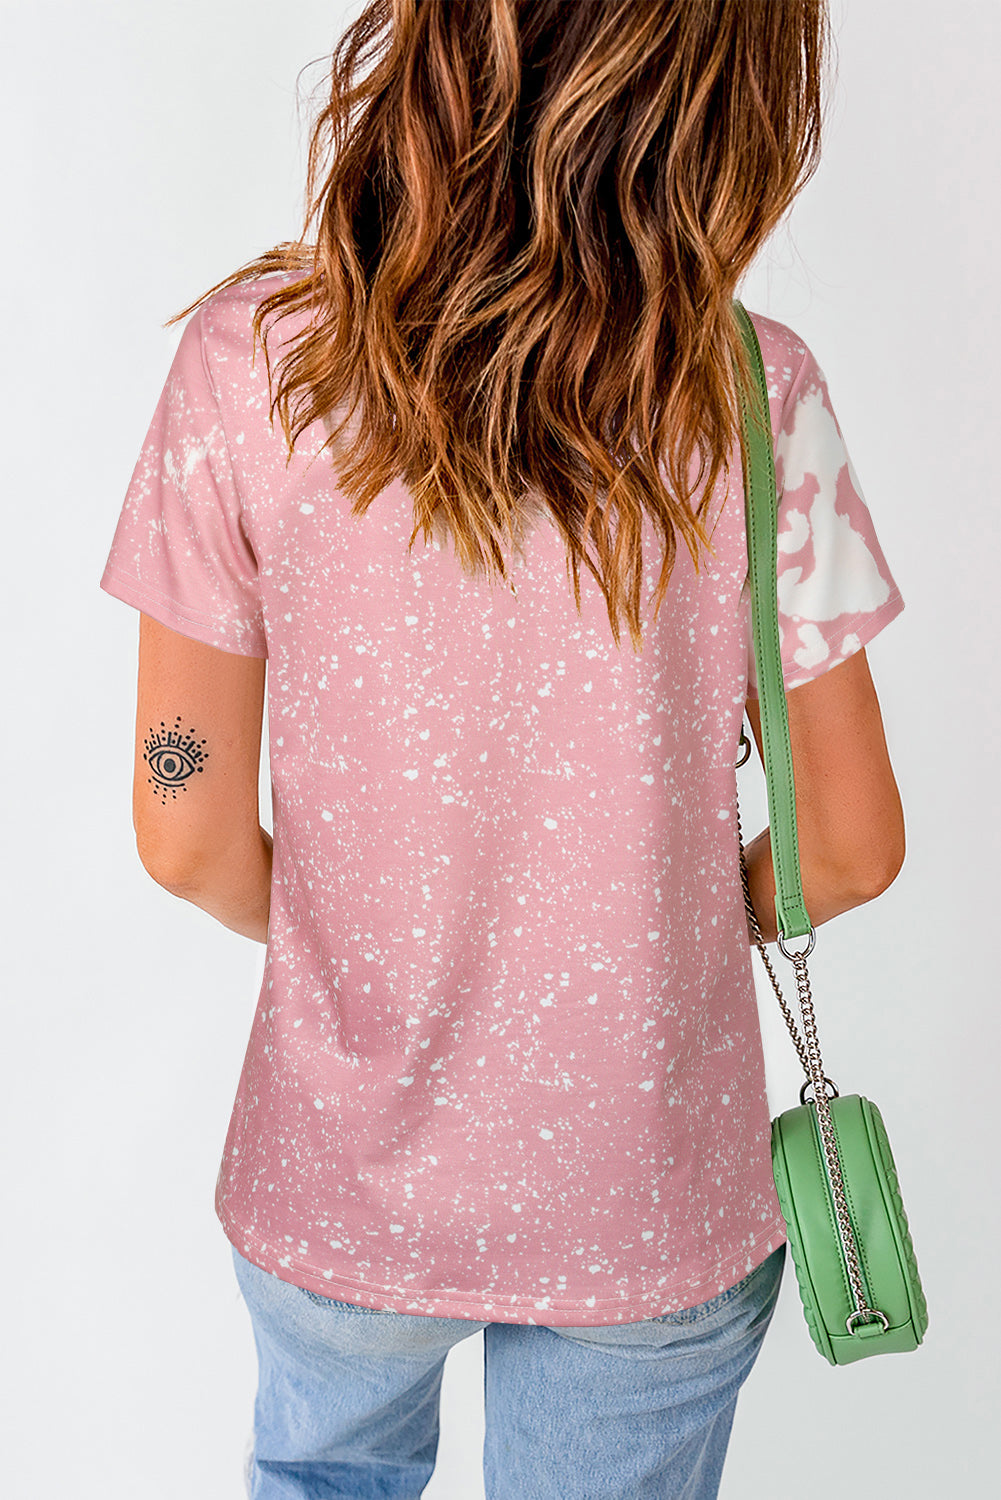 Pink Easter Printed Bunny Graphic Tee Shirt